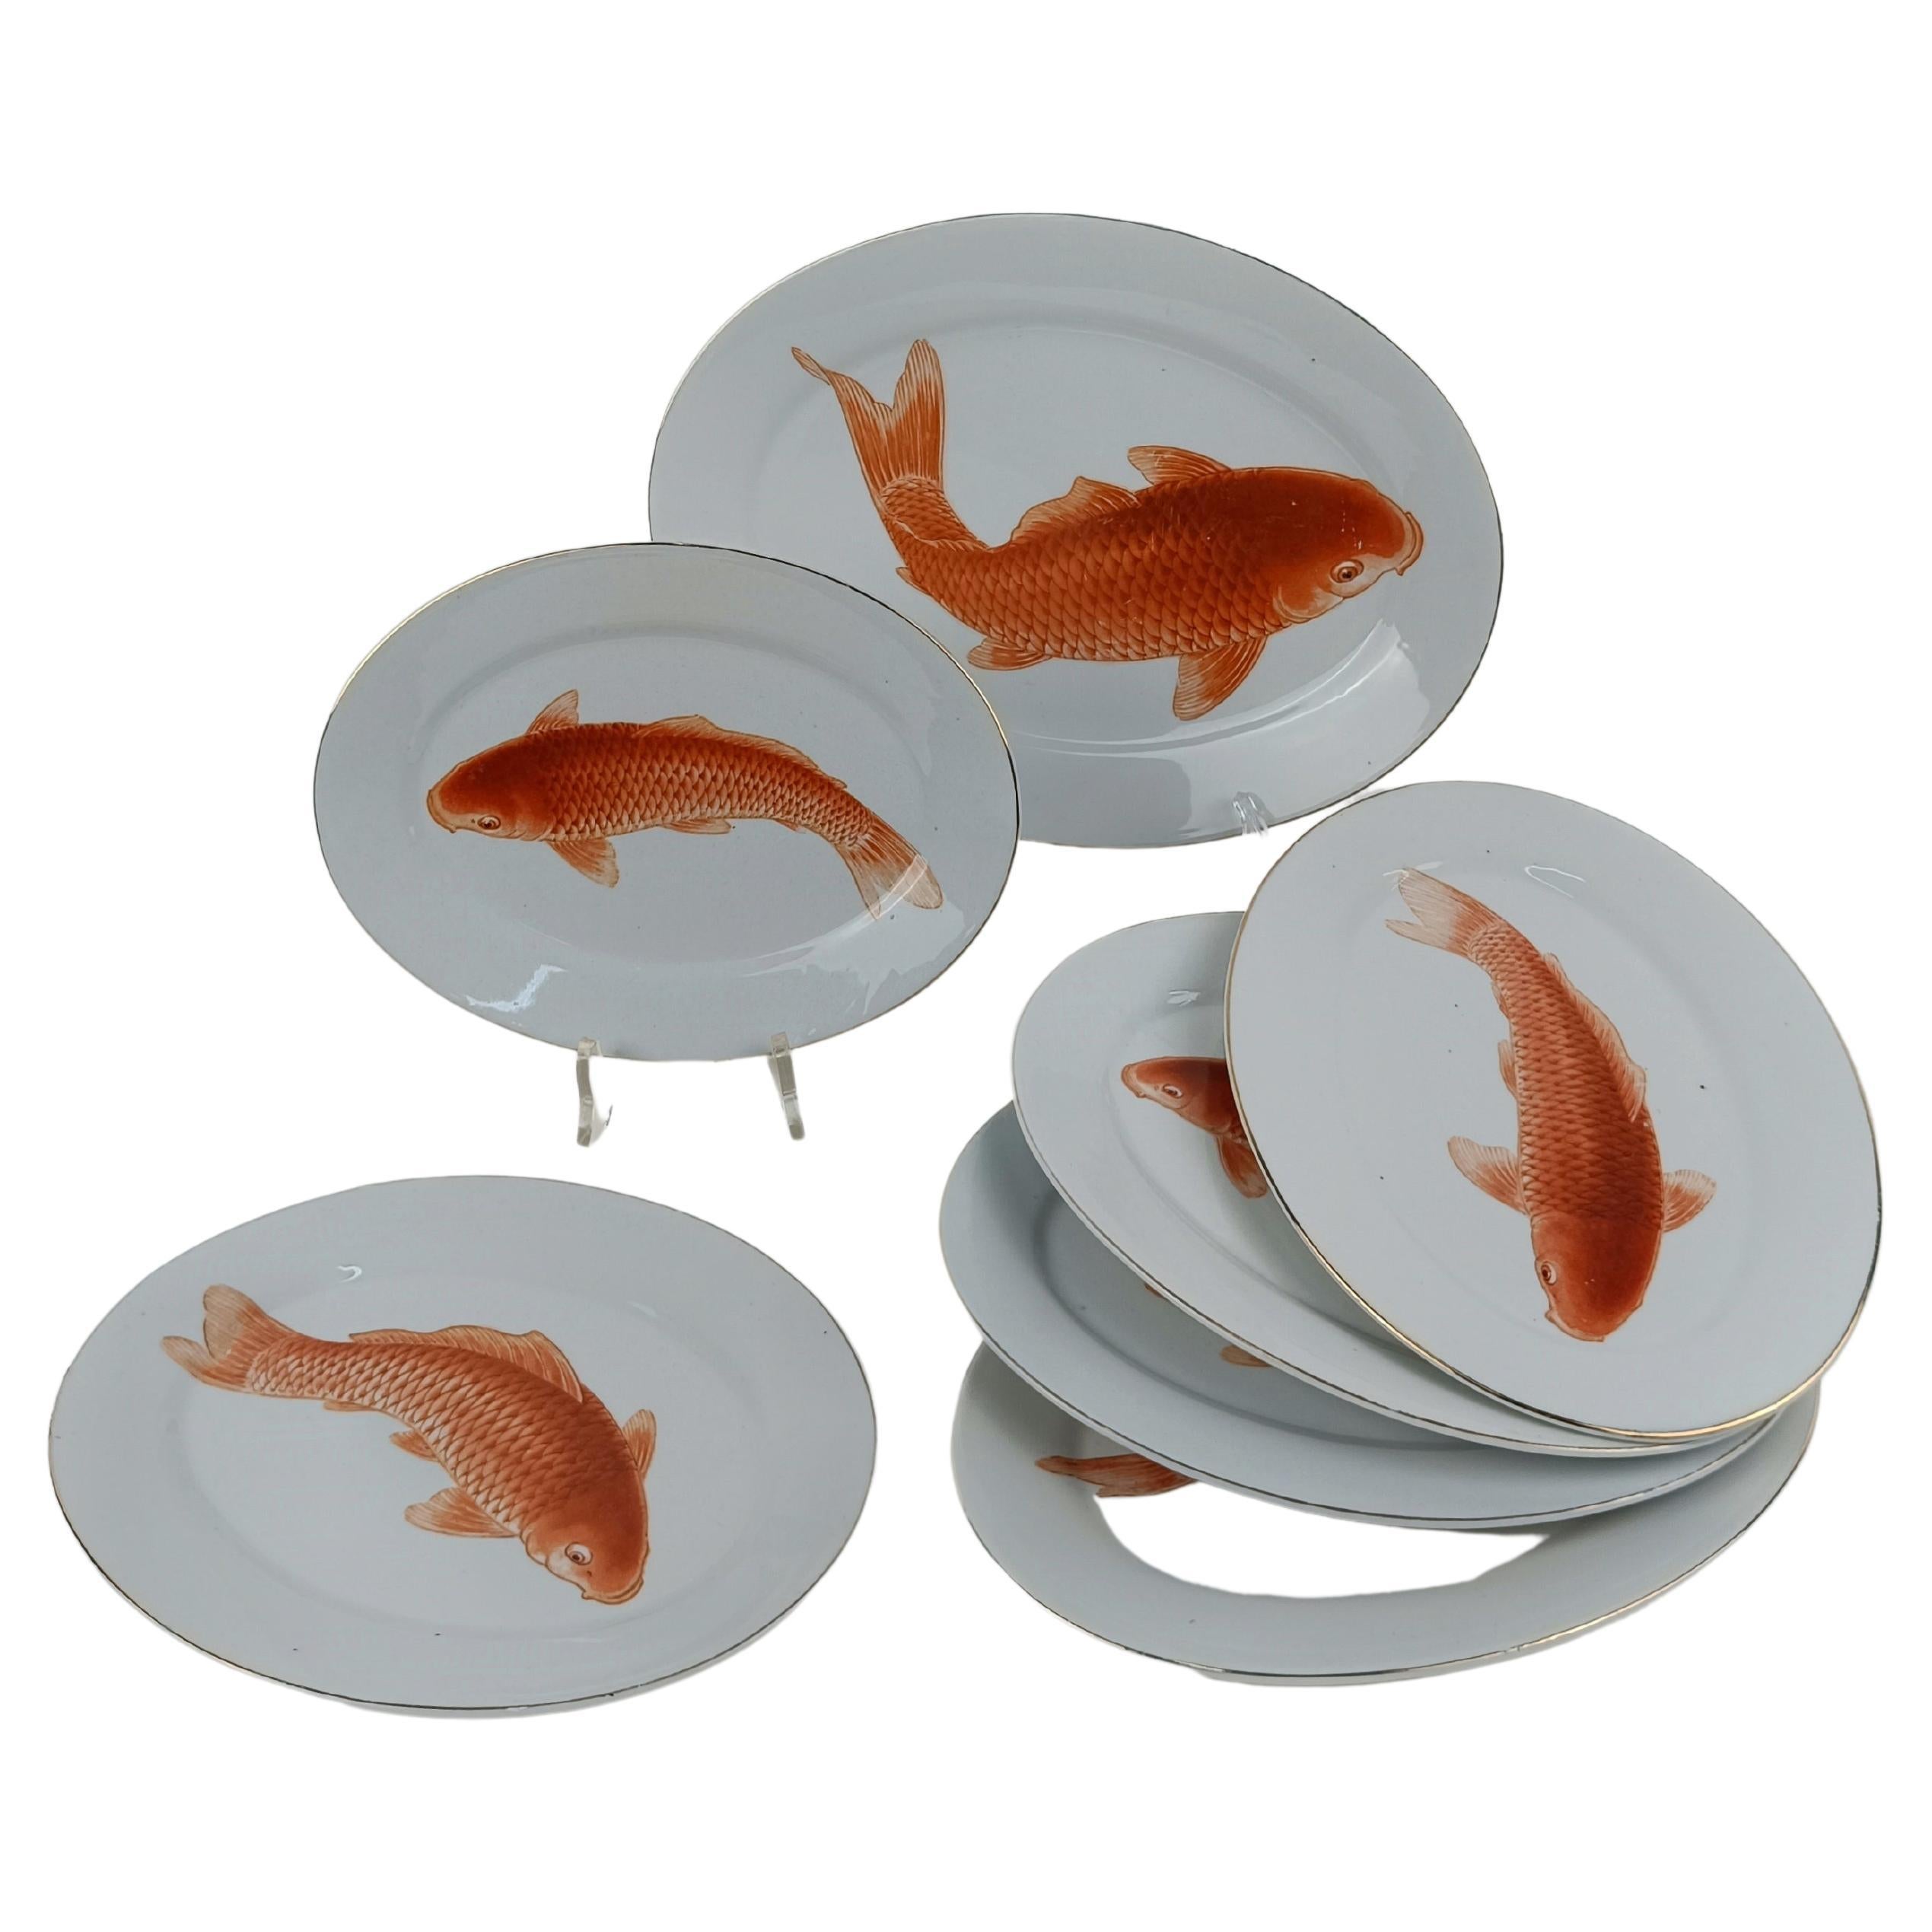 Fine Porcelain and Koi Carp dart in every direction on six different plates, not counting the serving plate.

Don't be fooled by the Japanese decoration of these vintage plates because their origins are not oriental but European, precisely from the